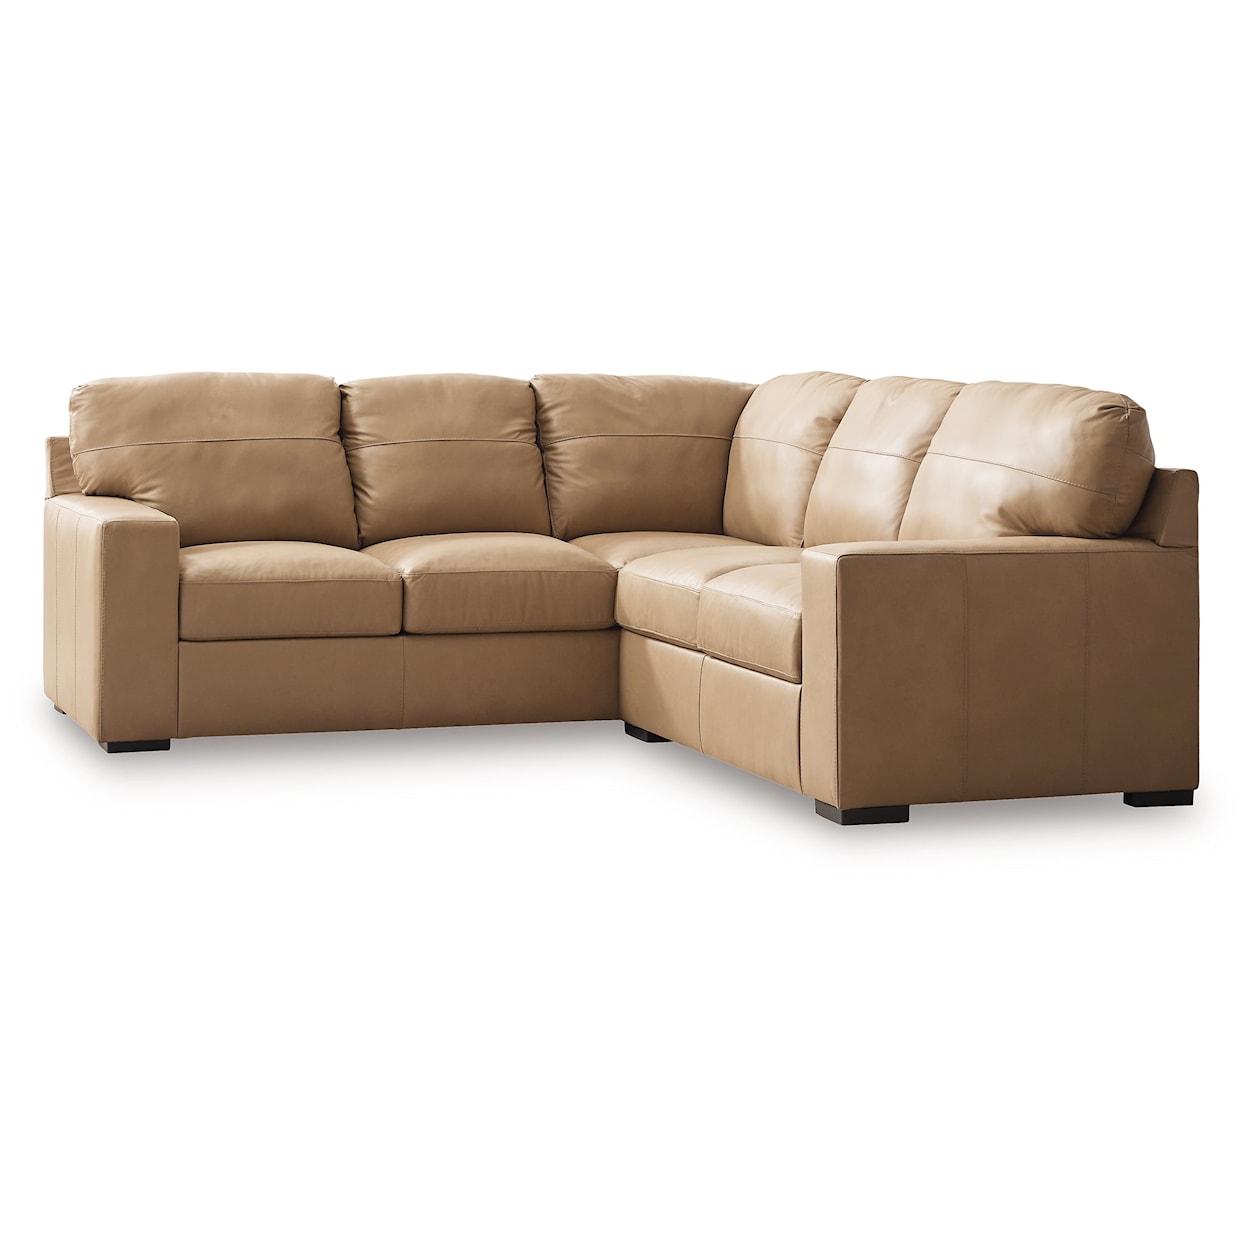 Benchcraft Bandon 2-Piece Sectional